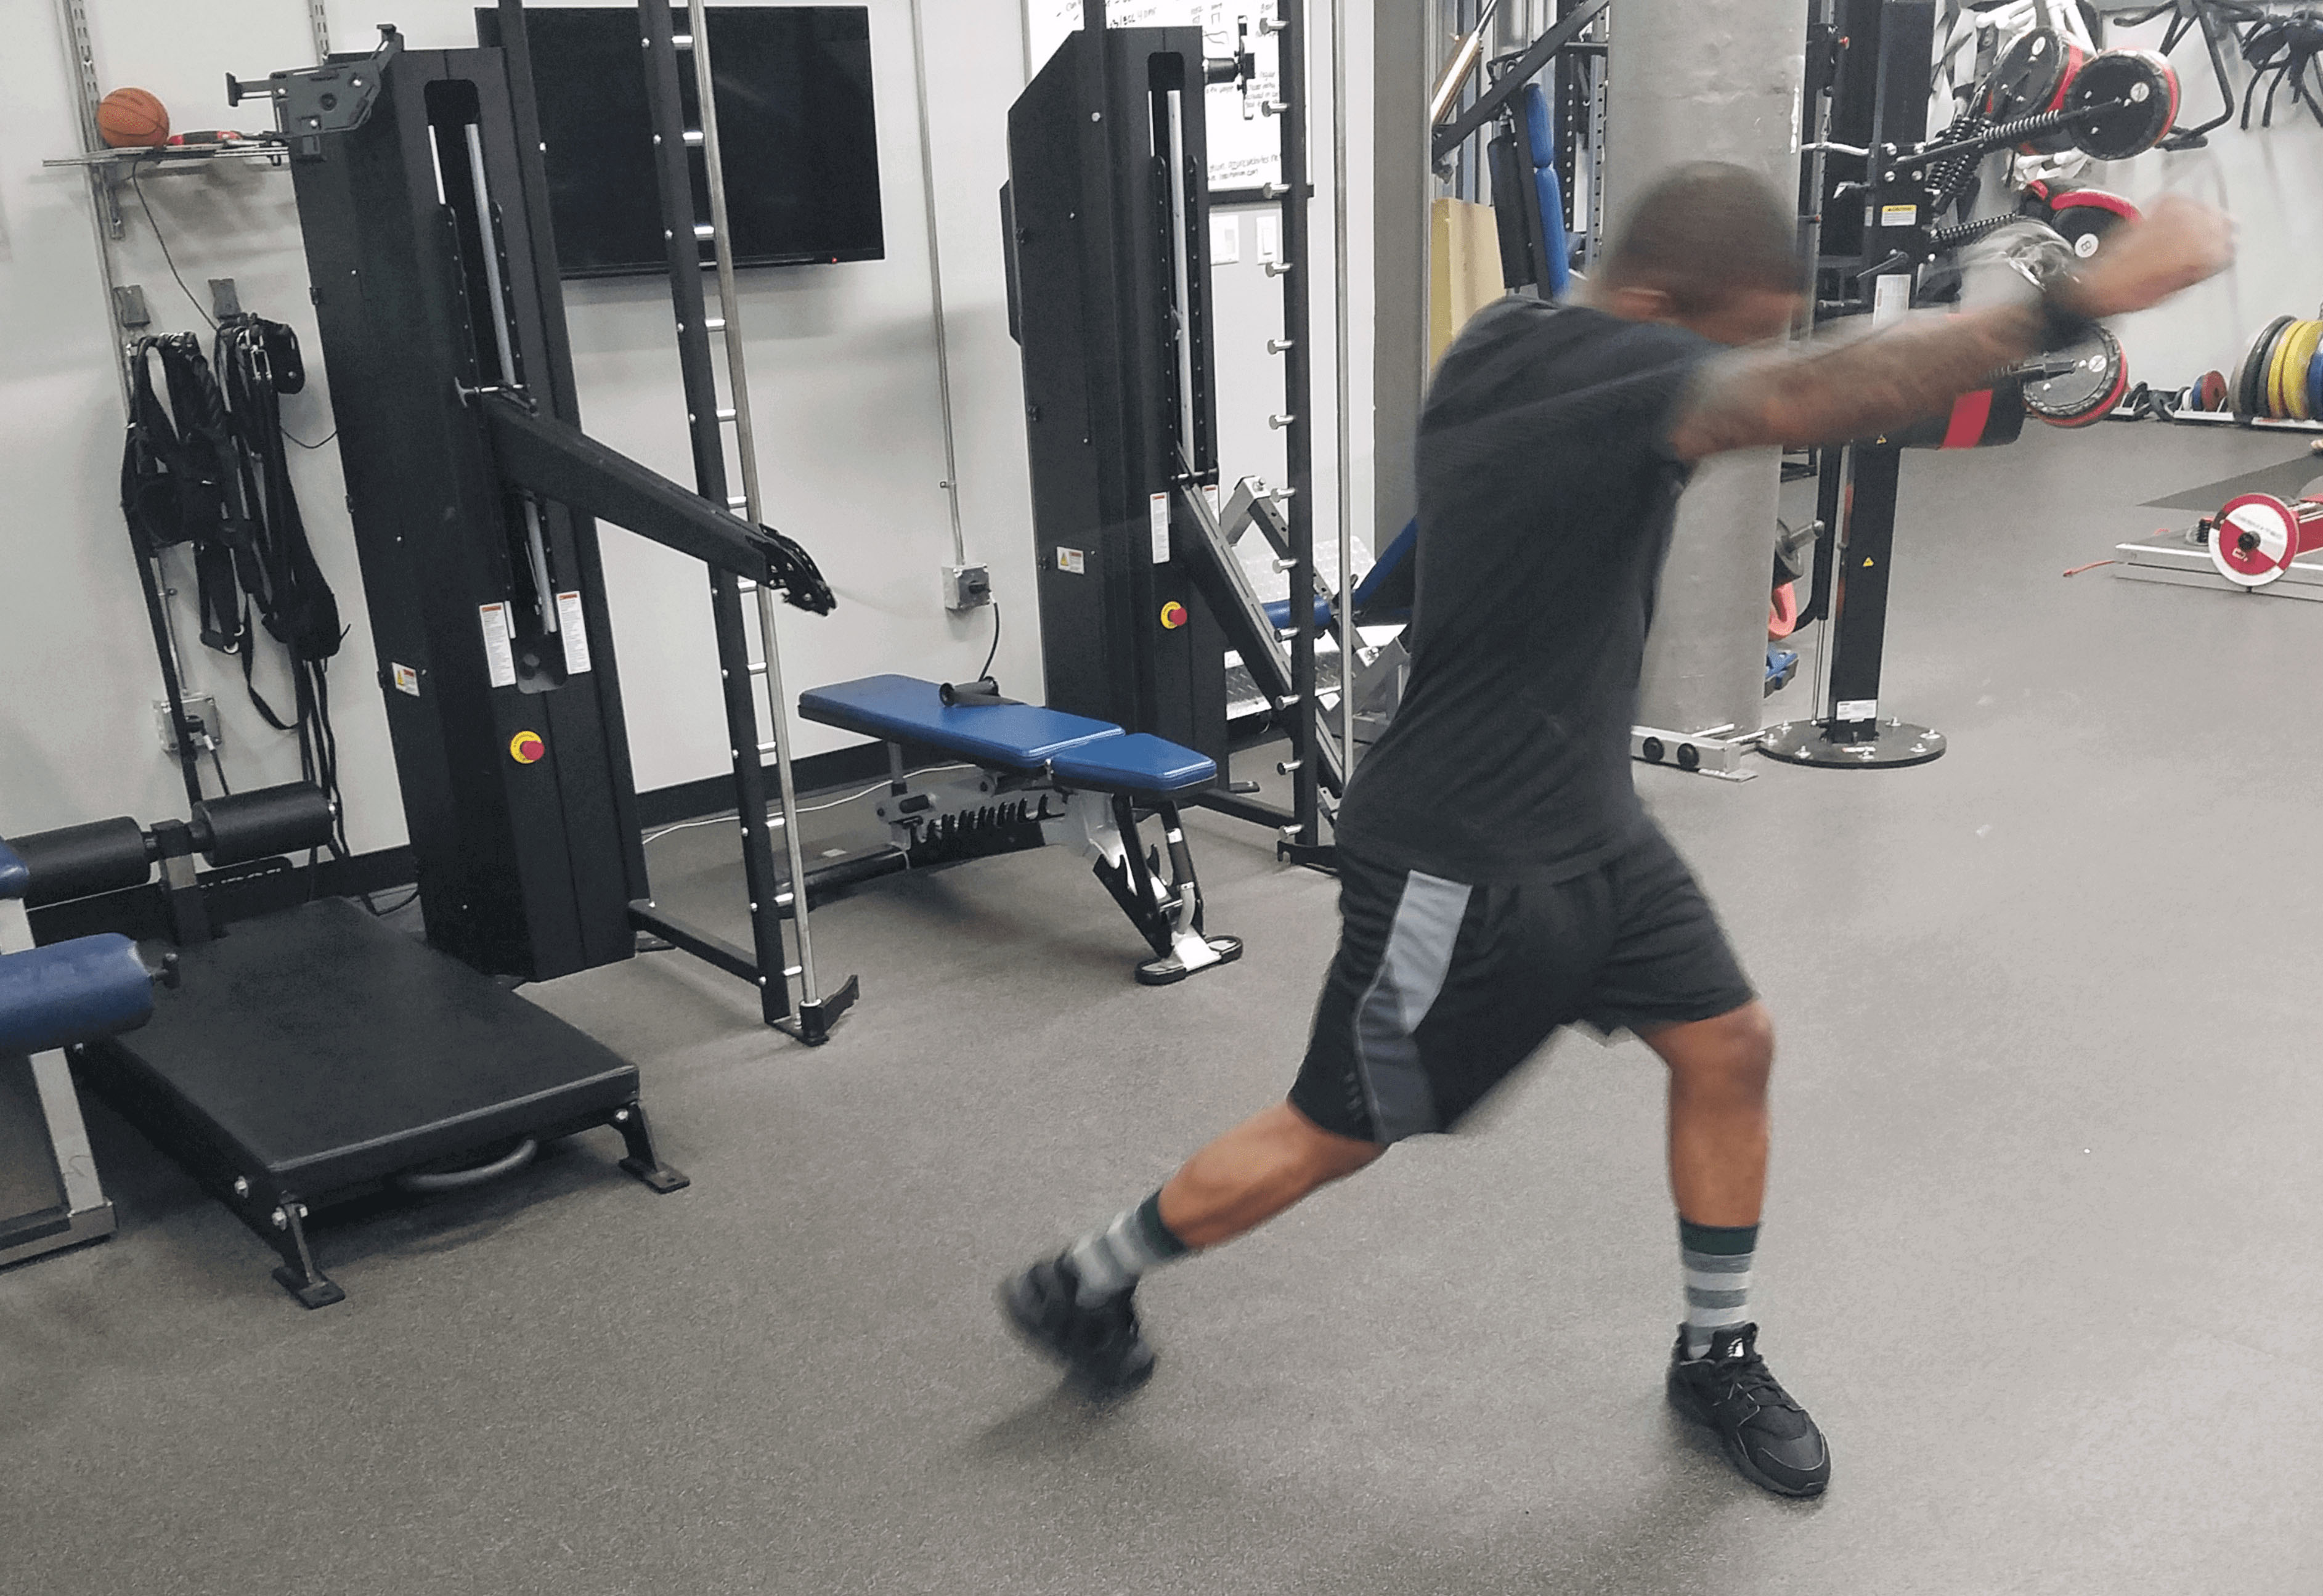 Combat sports training with 1080 Sprint: Orthodox and southpaw counter-movement and retreats